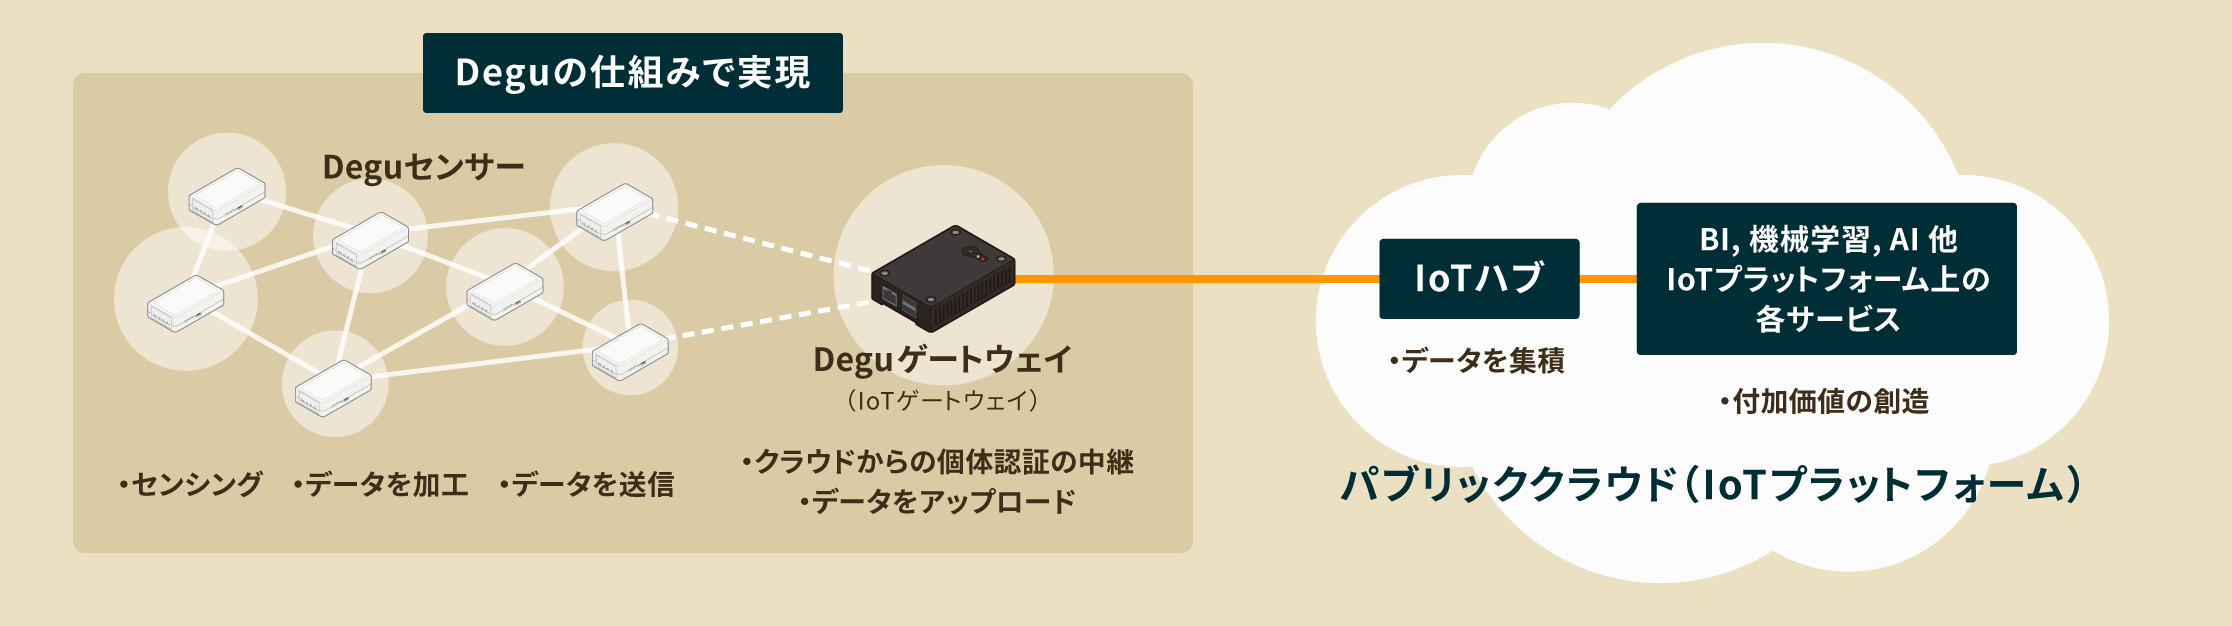 about_degu-a6_01